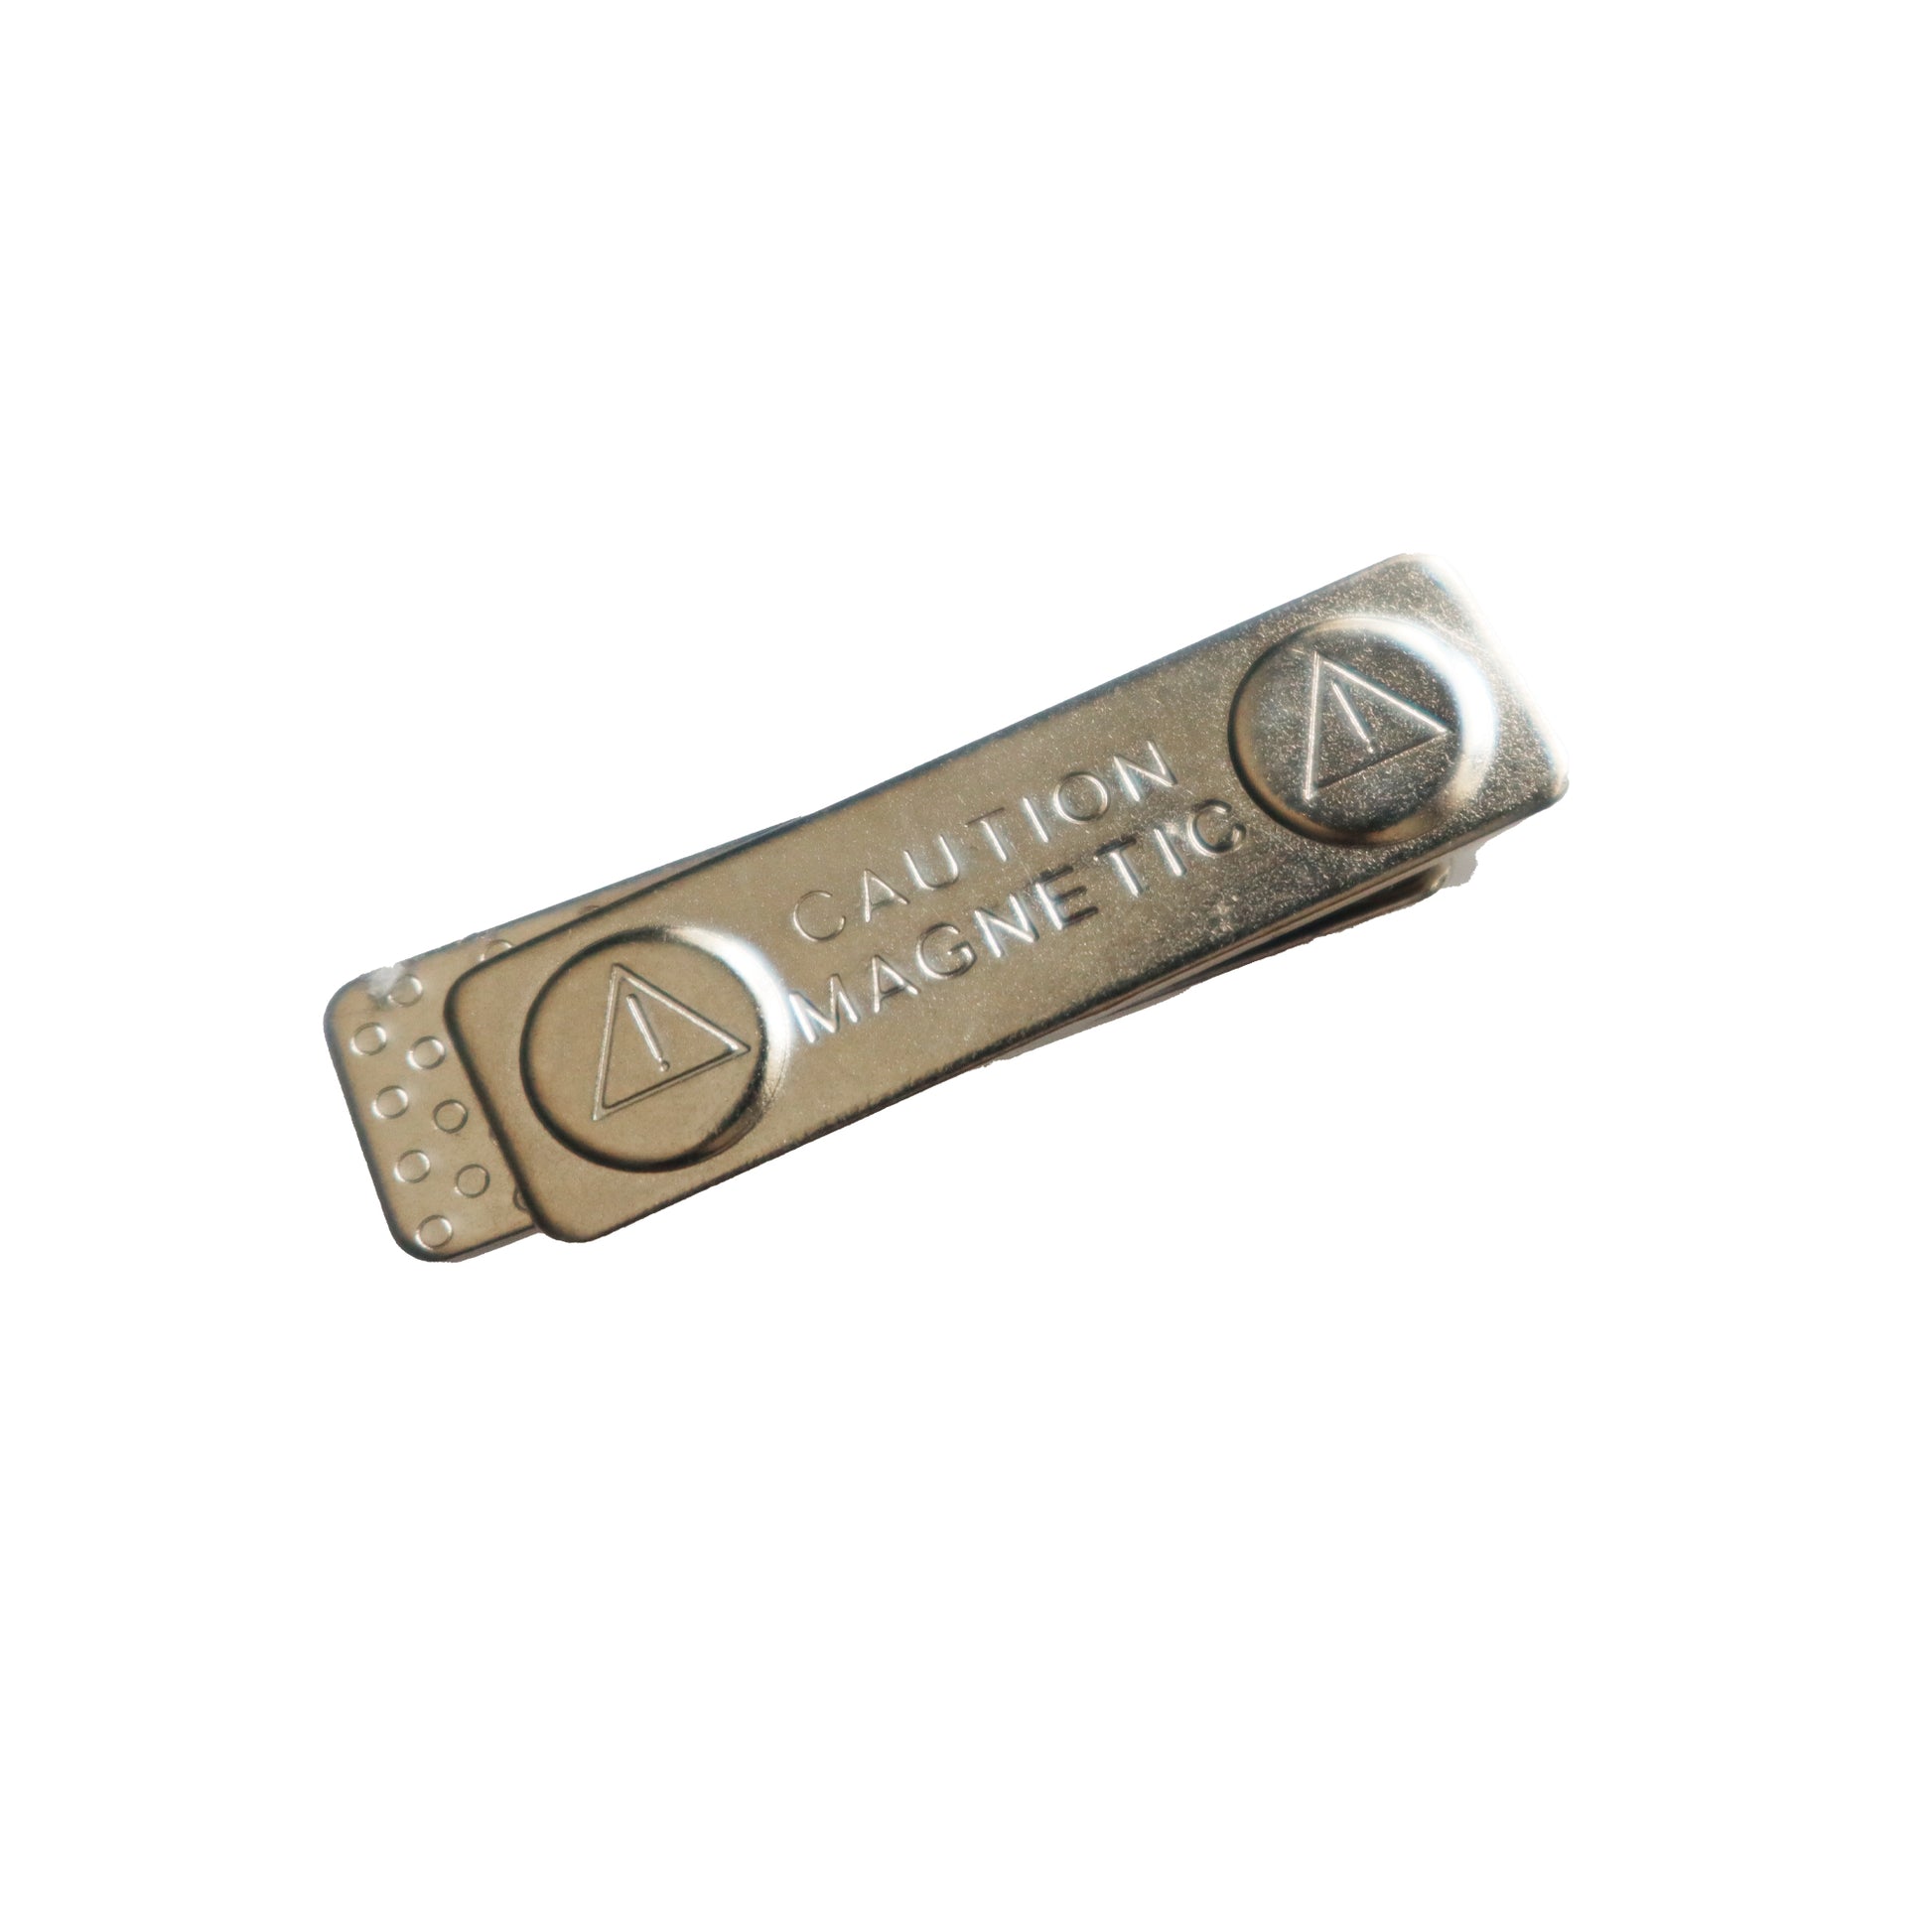 A silver Magnetic ID Badge Holder Sticky Back (P/N 5730-3000) with a triangular logo and "CAUTION MAGNETIC" text embossed on it, this versatile device can also function as a magnetic ID badge holder.